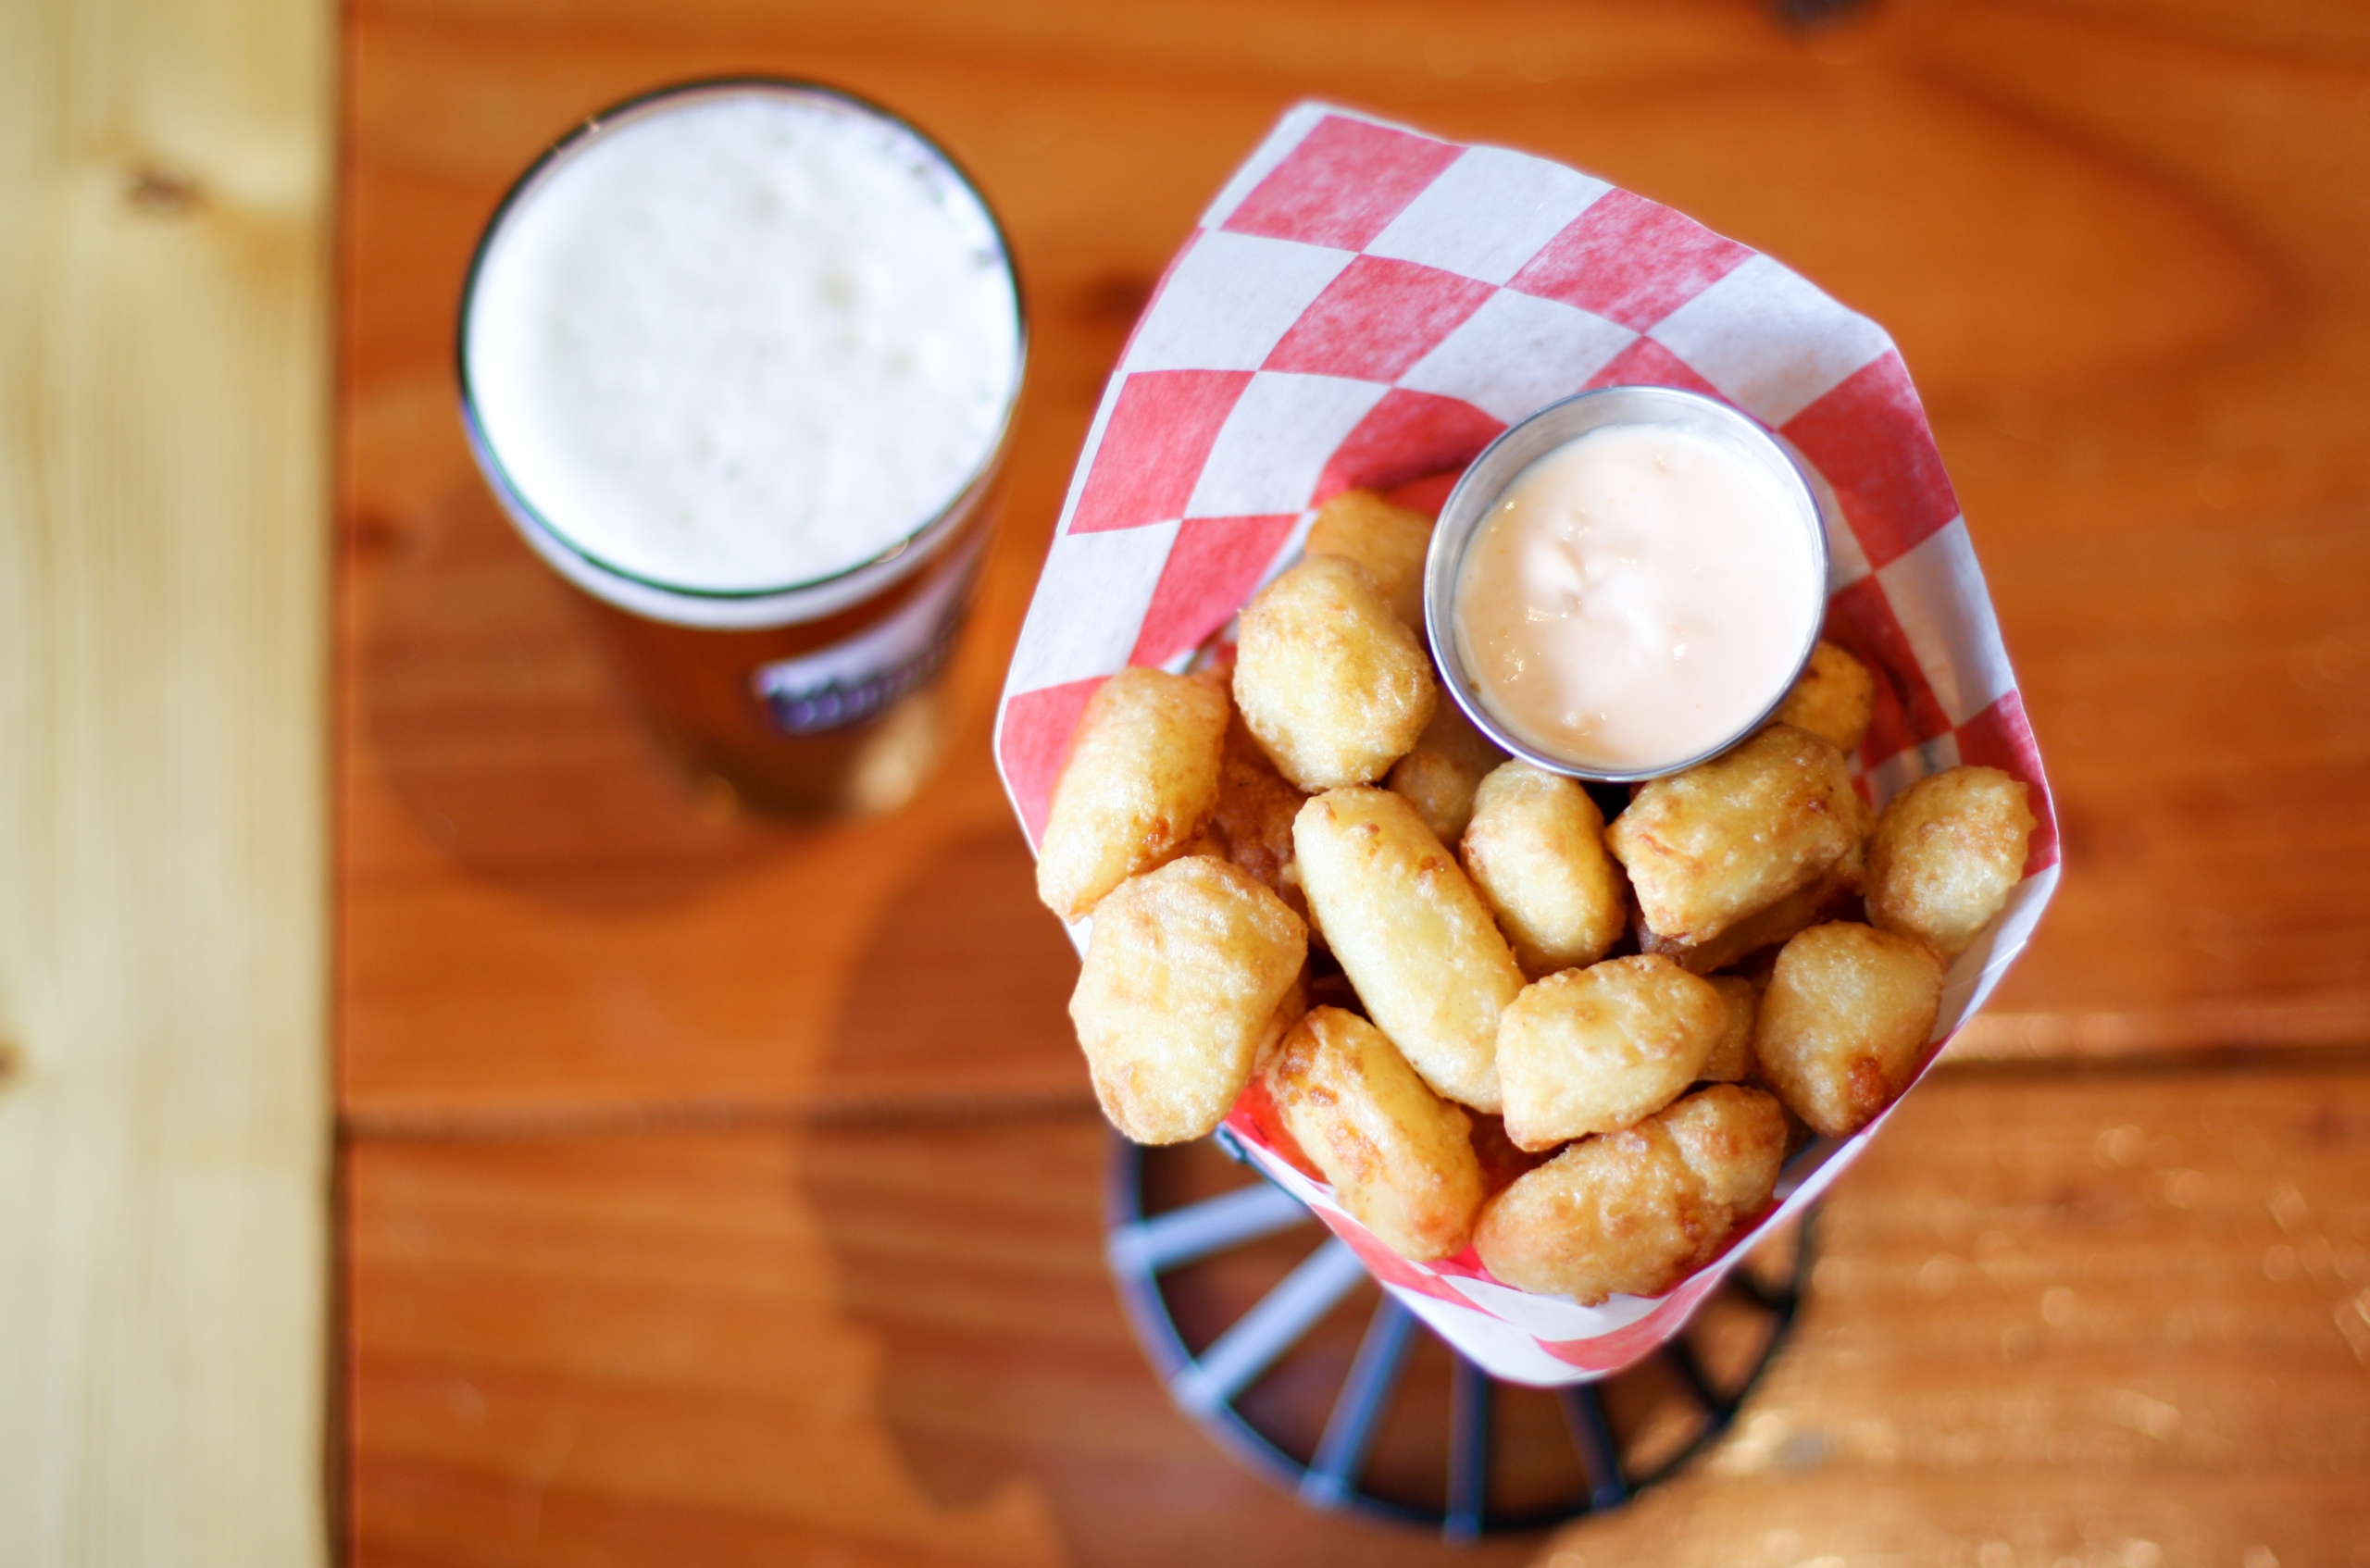 Wisconsin Cheese Curds Sampler